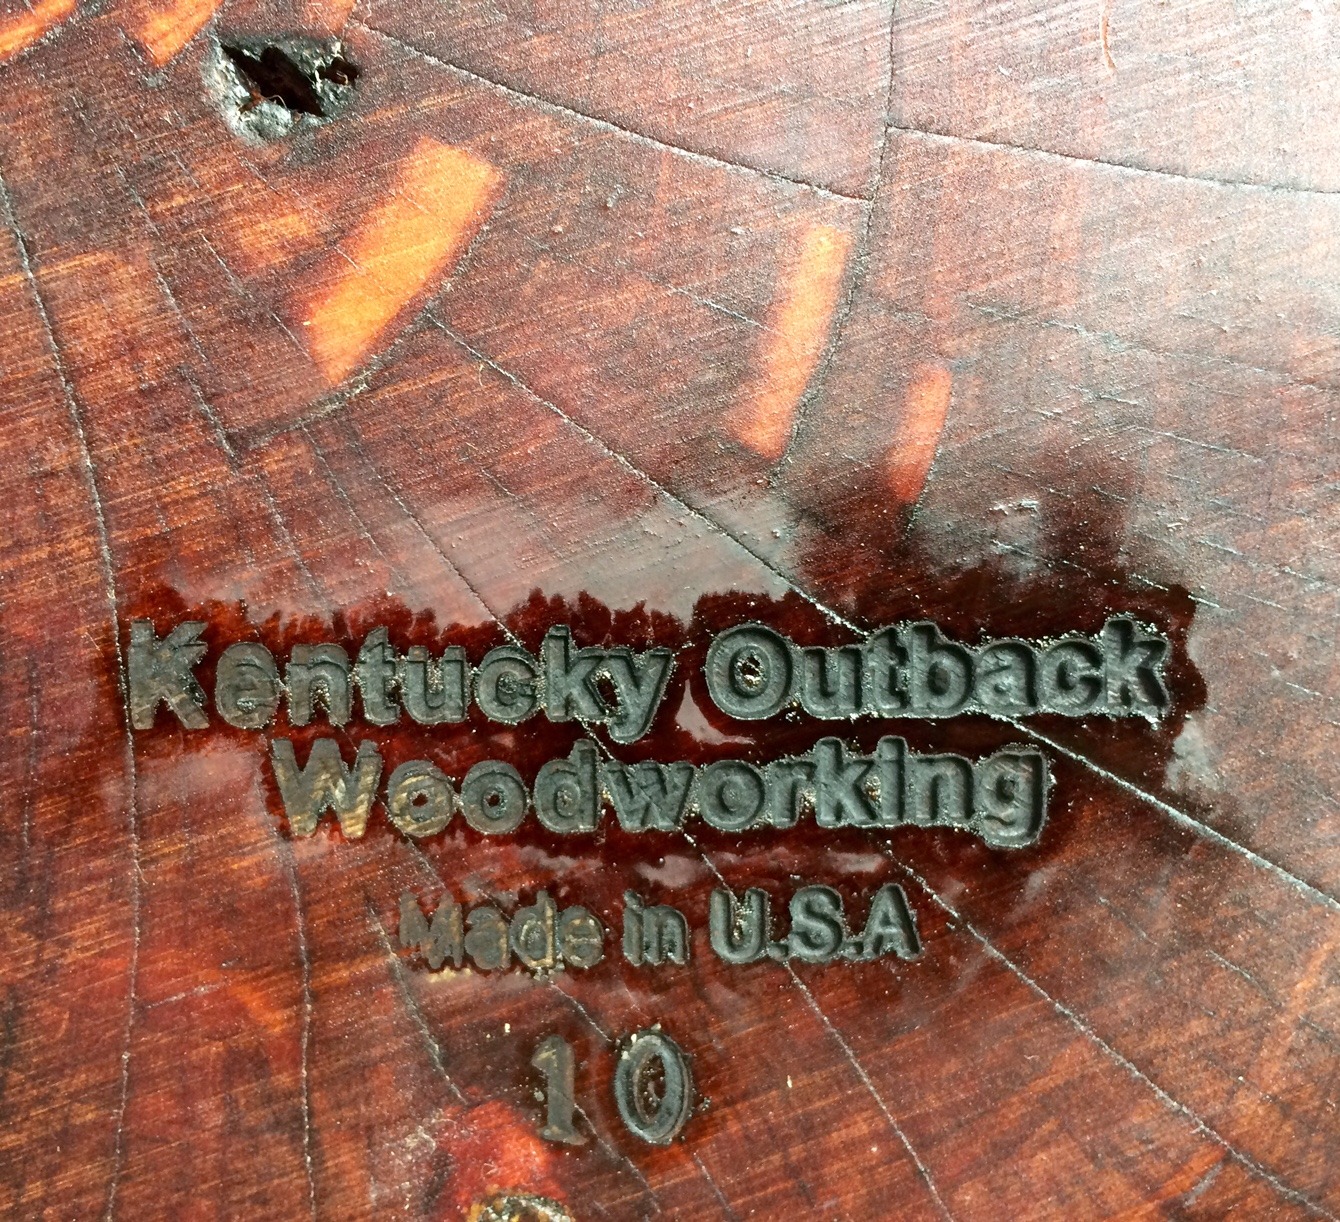 KY Outback Woodworking, LLC